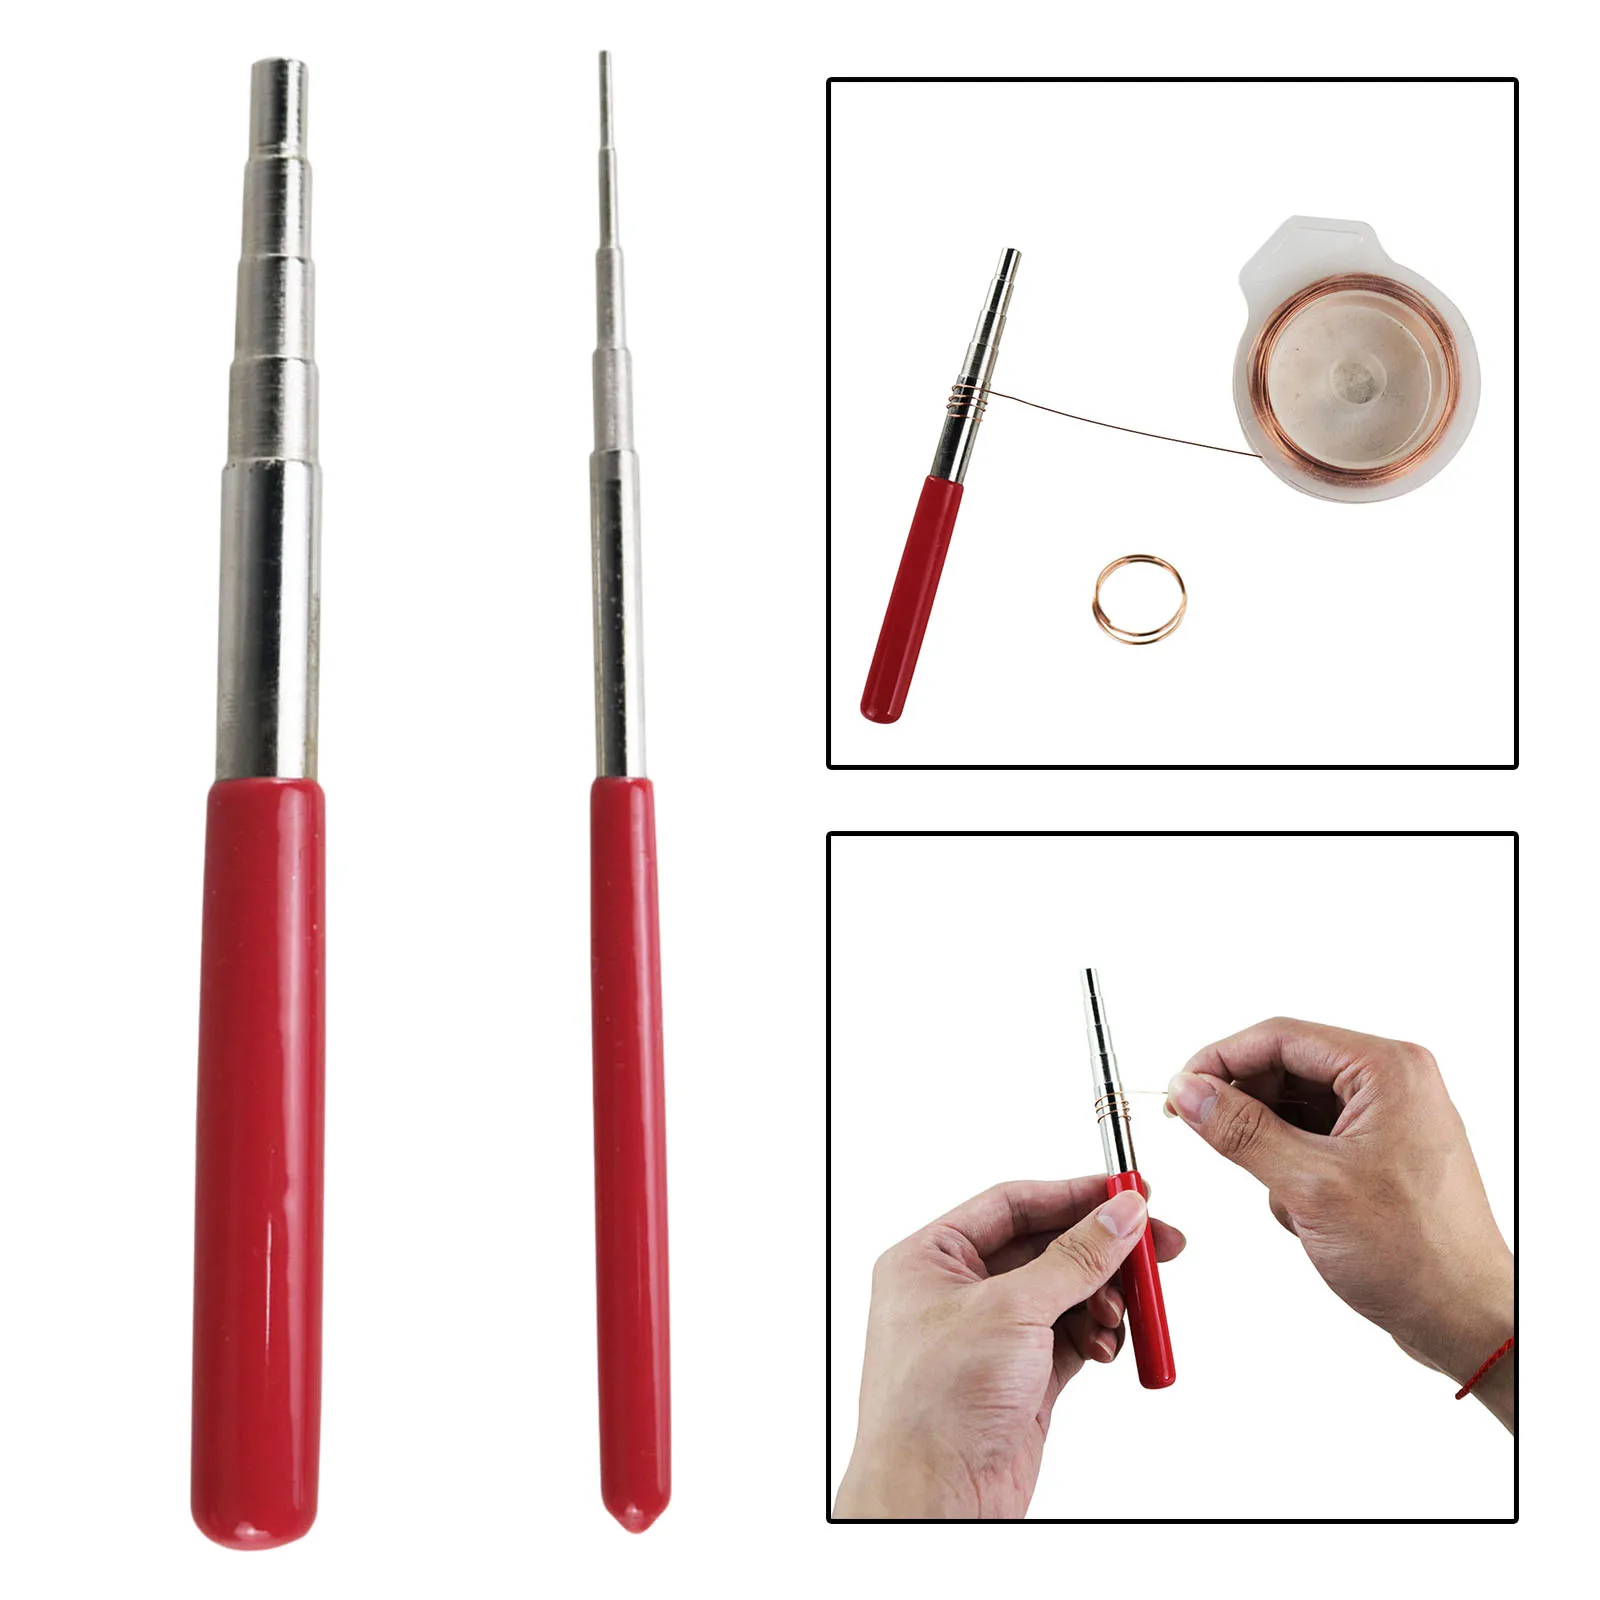 2pcs Wire Looping Tool Mandrel Jewelry Wire Wrapping Jump Ring Forming Molding Winding Sticks Wrapping Coil Jig Tool Set